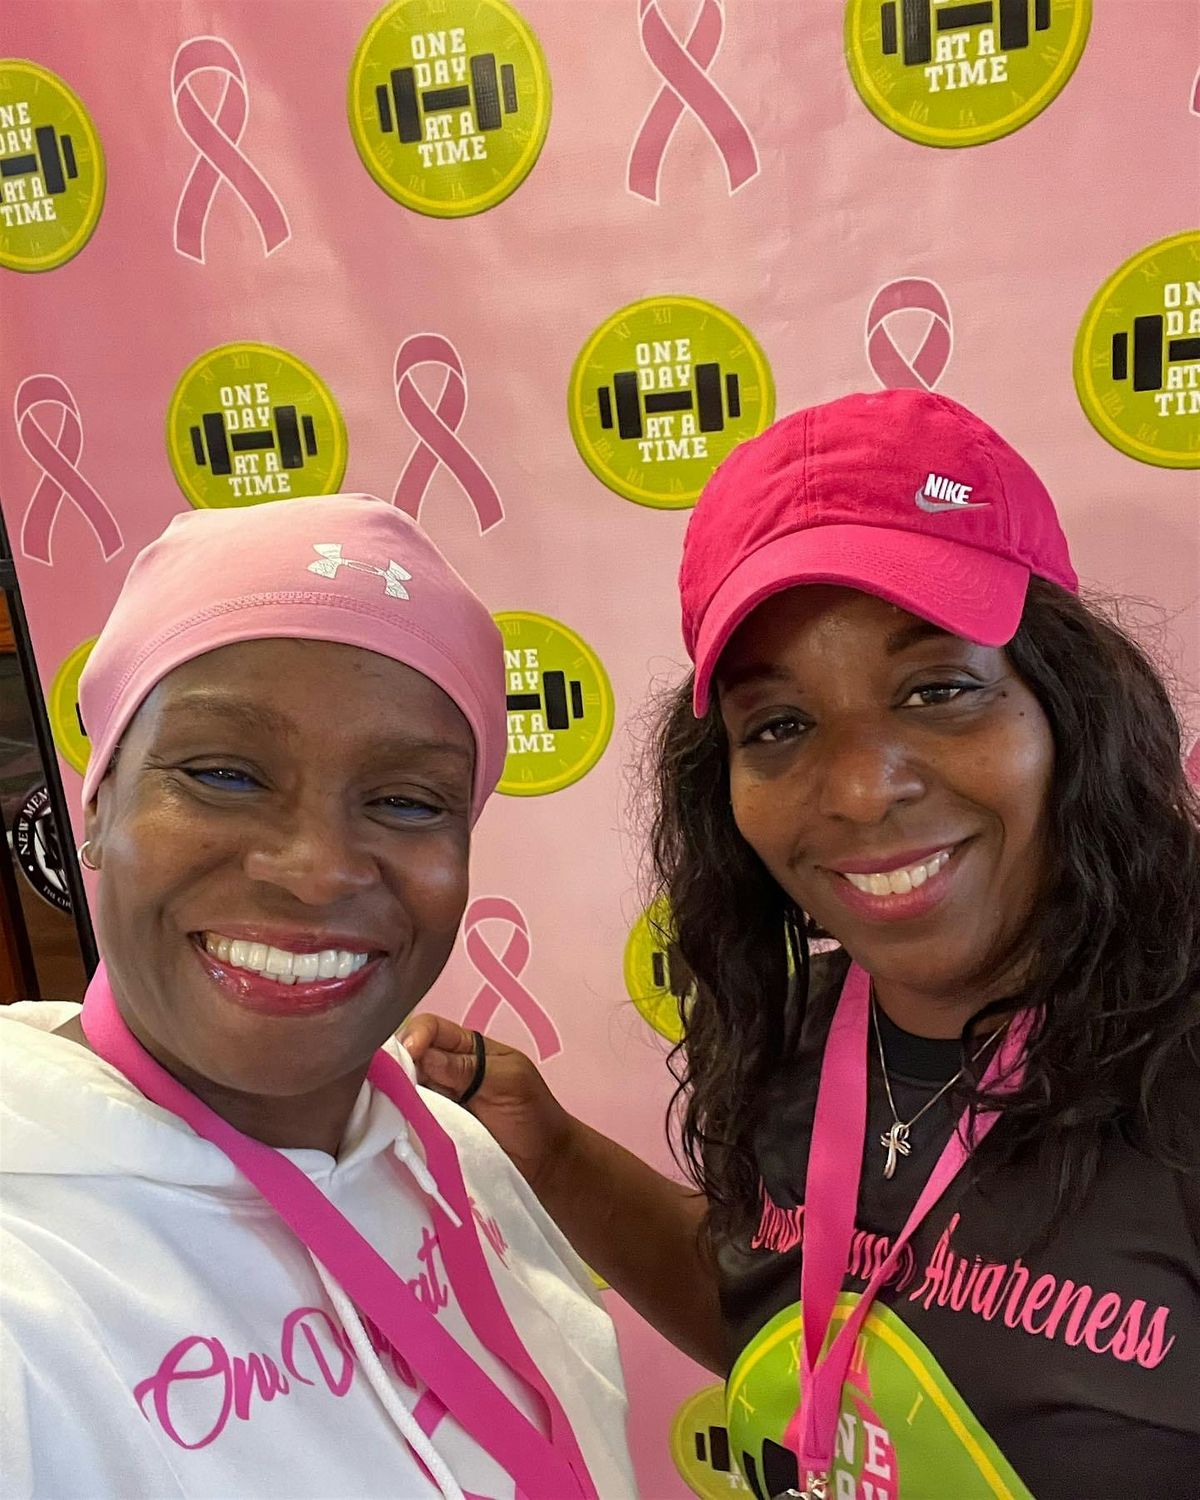 BeAware Breast Cancer Awareness 5k - A Commemoration of 5 Years